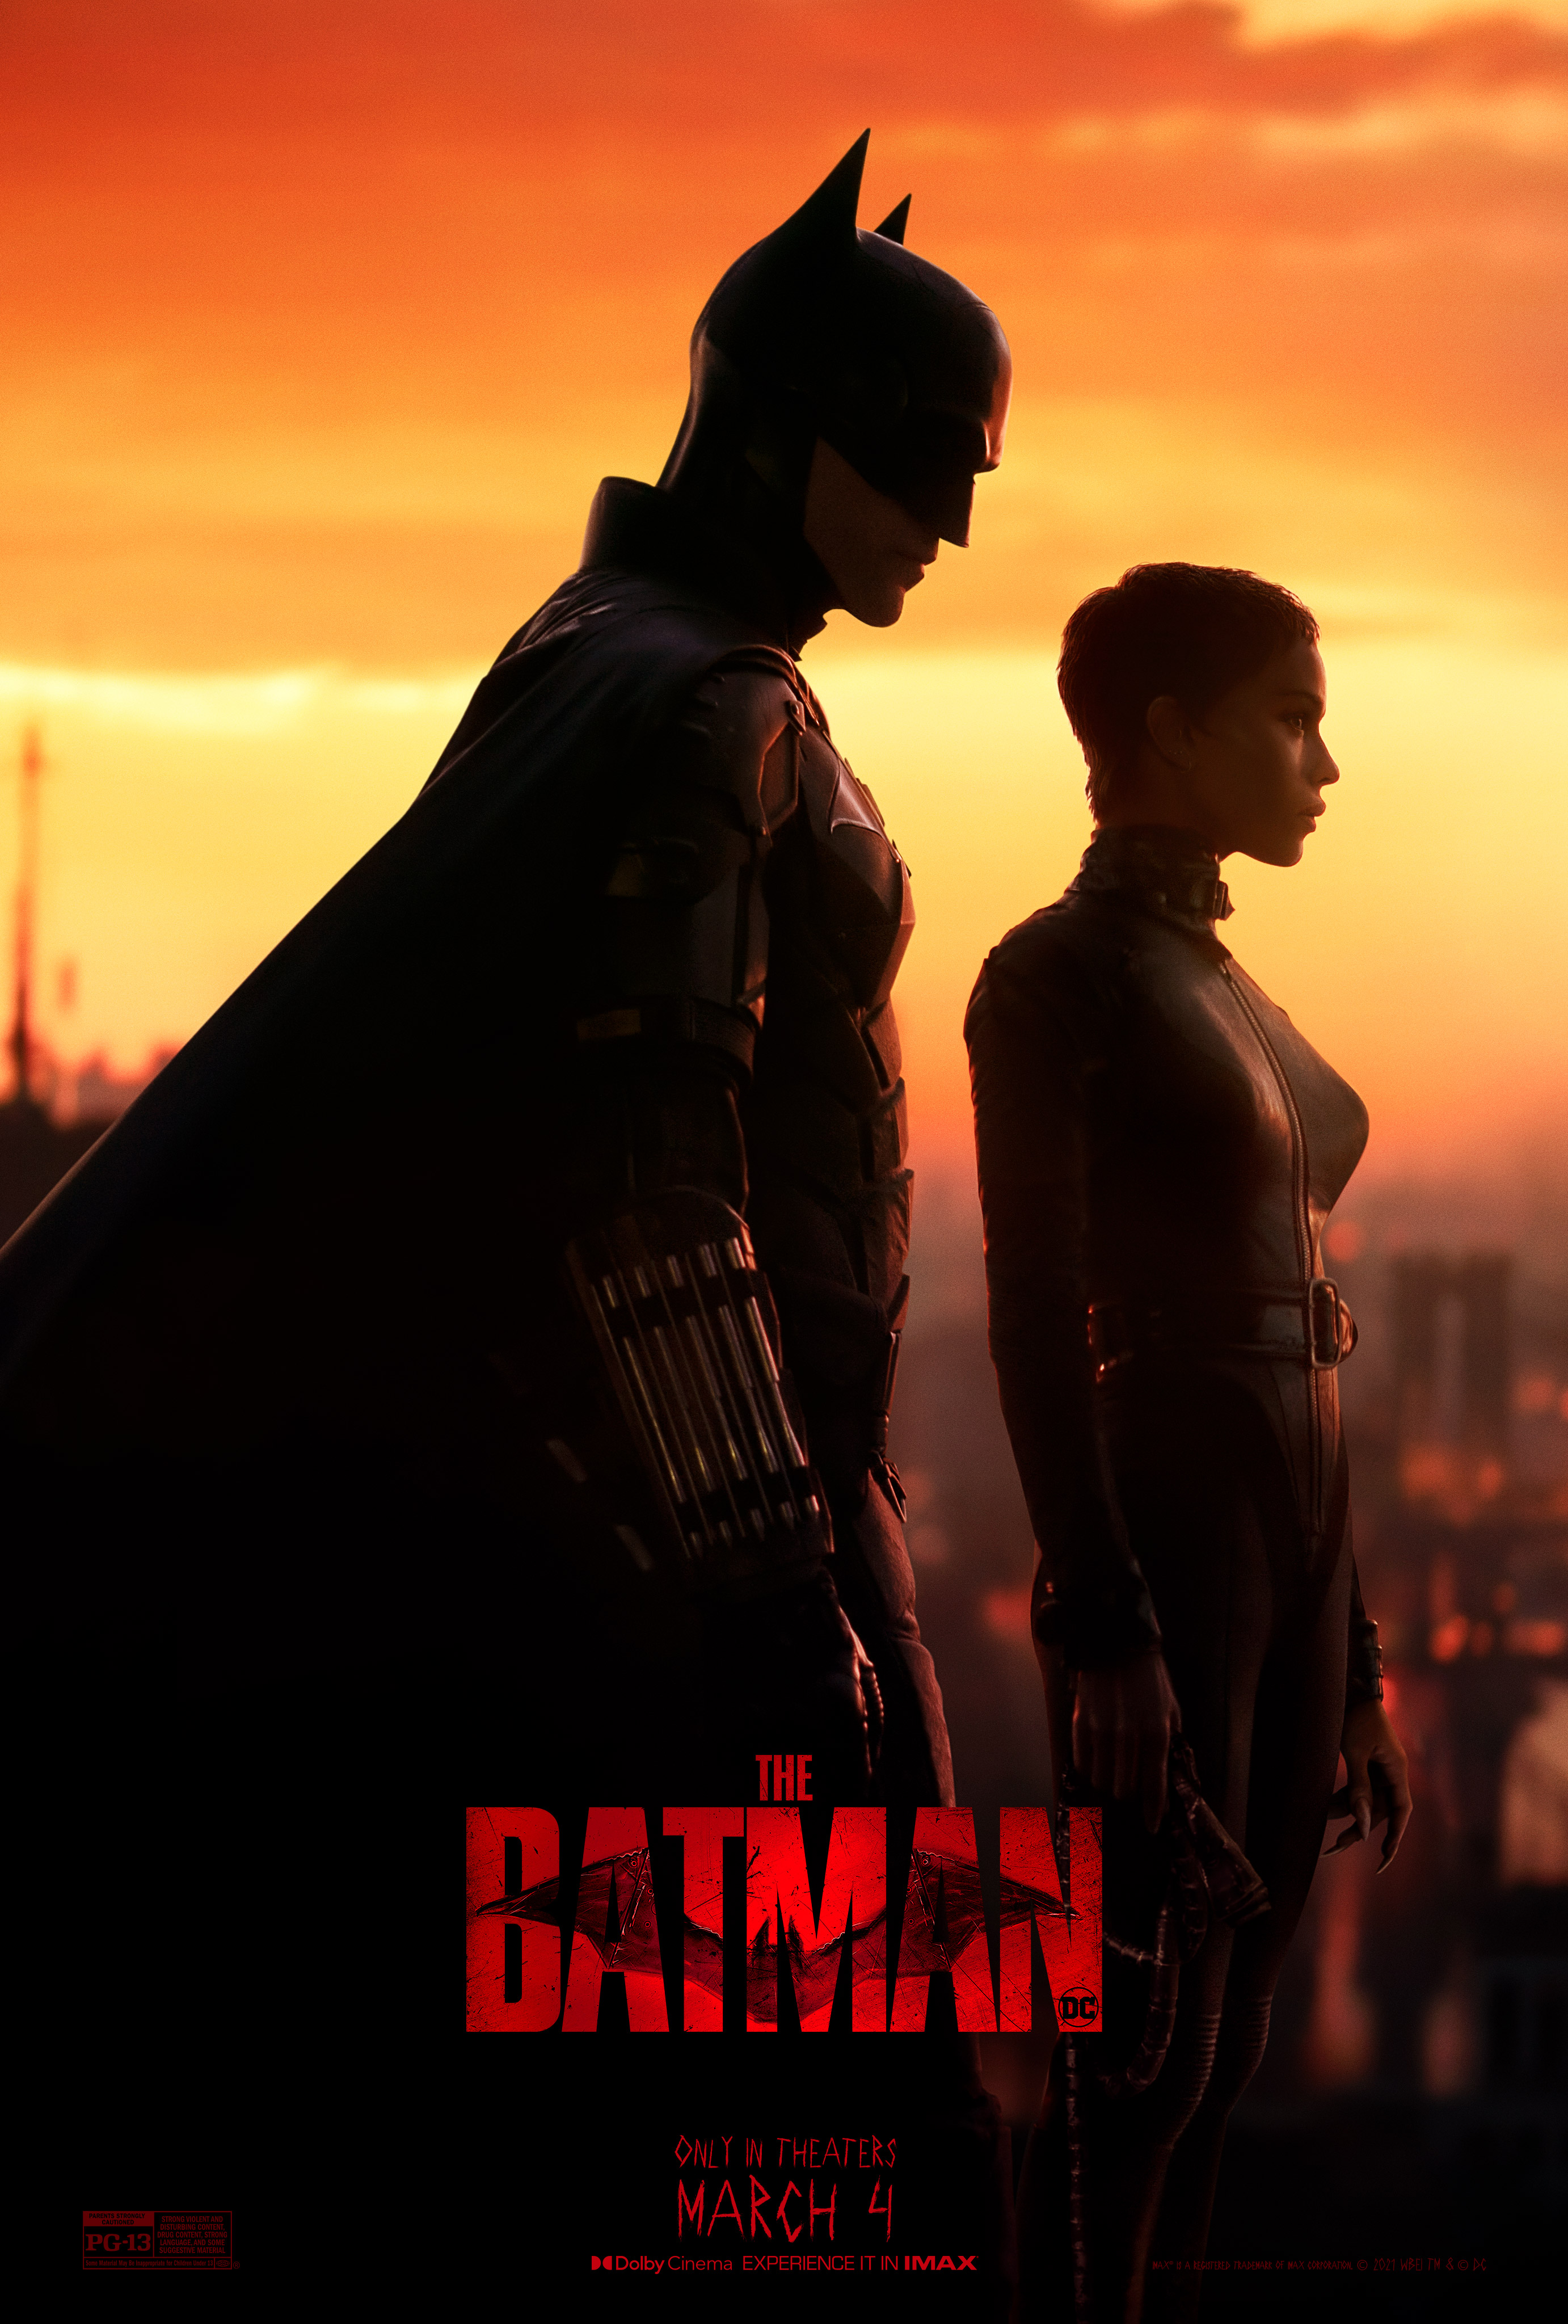 New poster for THE BATMAN. Pictured, Batman is standing behind Catwoman against an orange sky. 